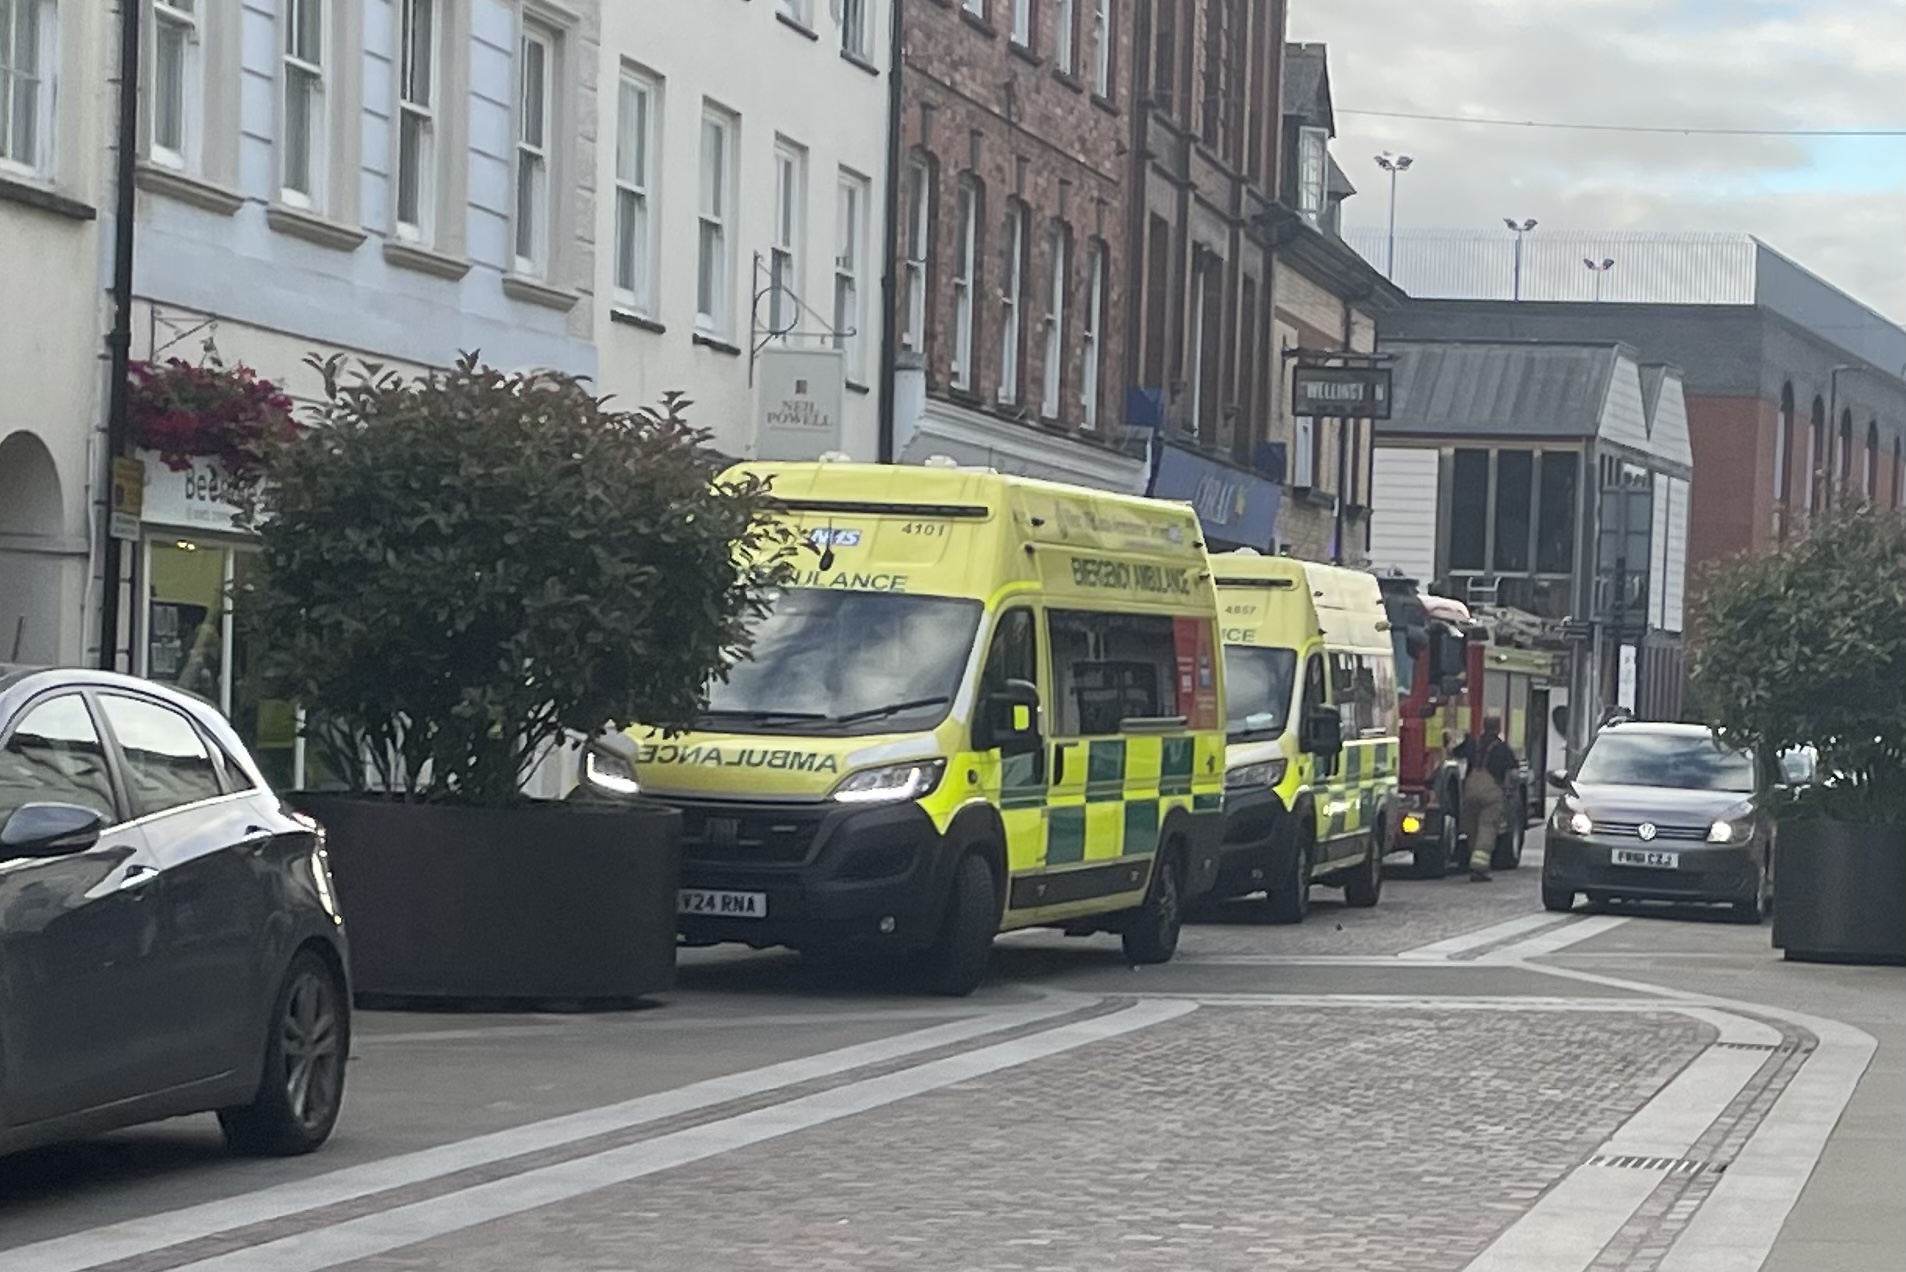 NEWS | Emergency services were called to an incident on Widemarsh Street in Hereford on Monday evening 